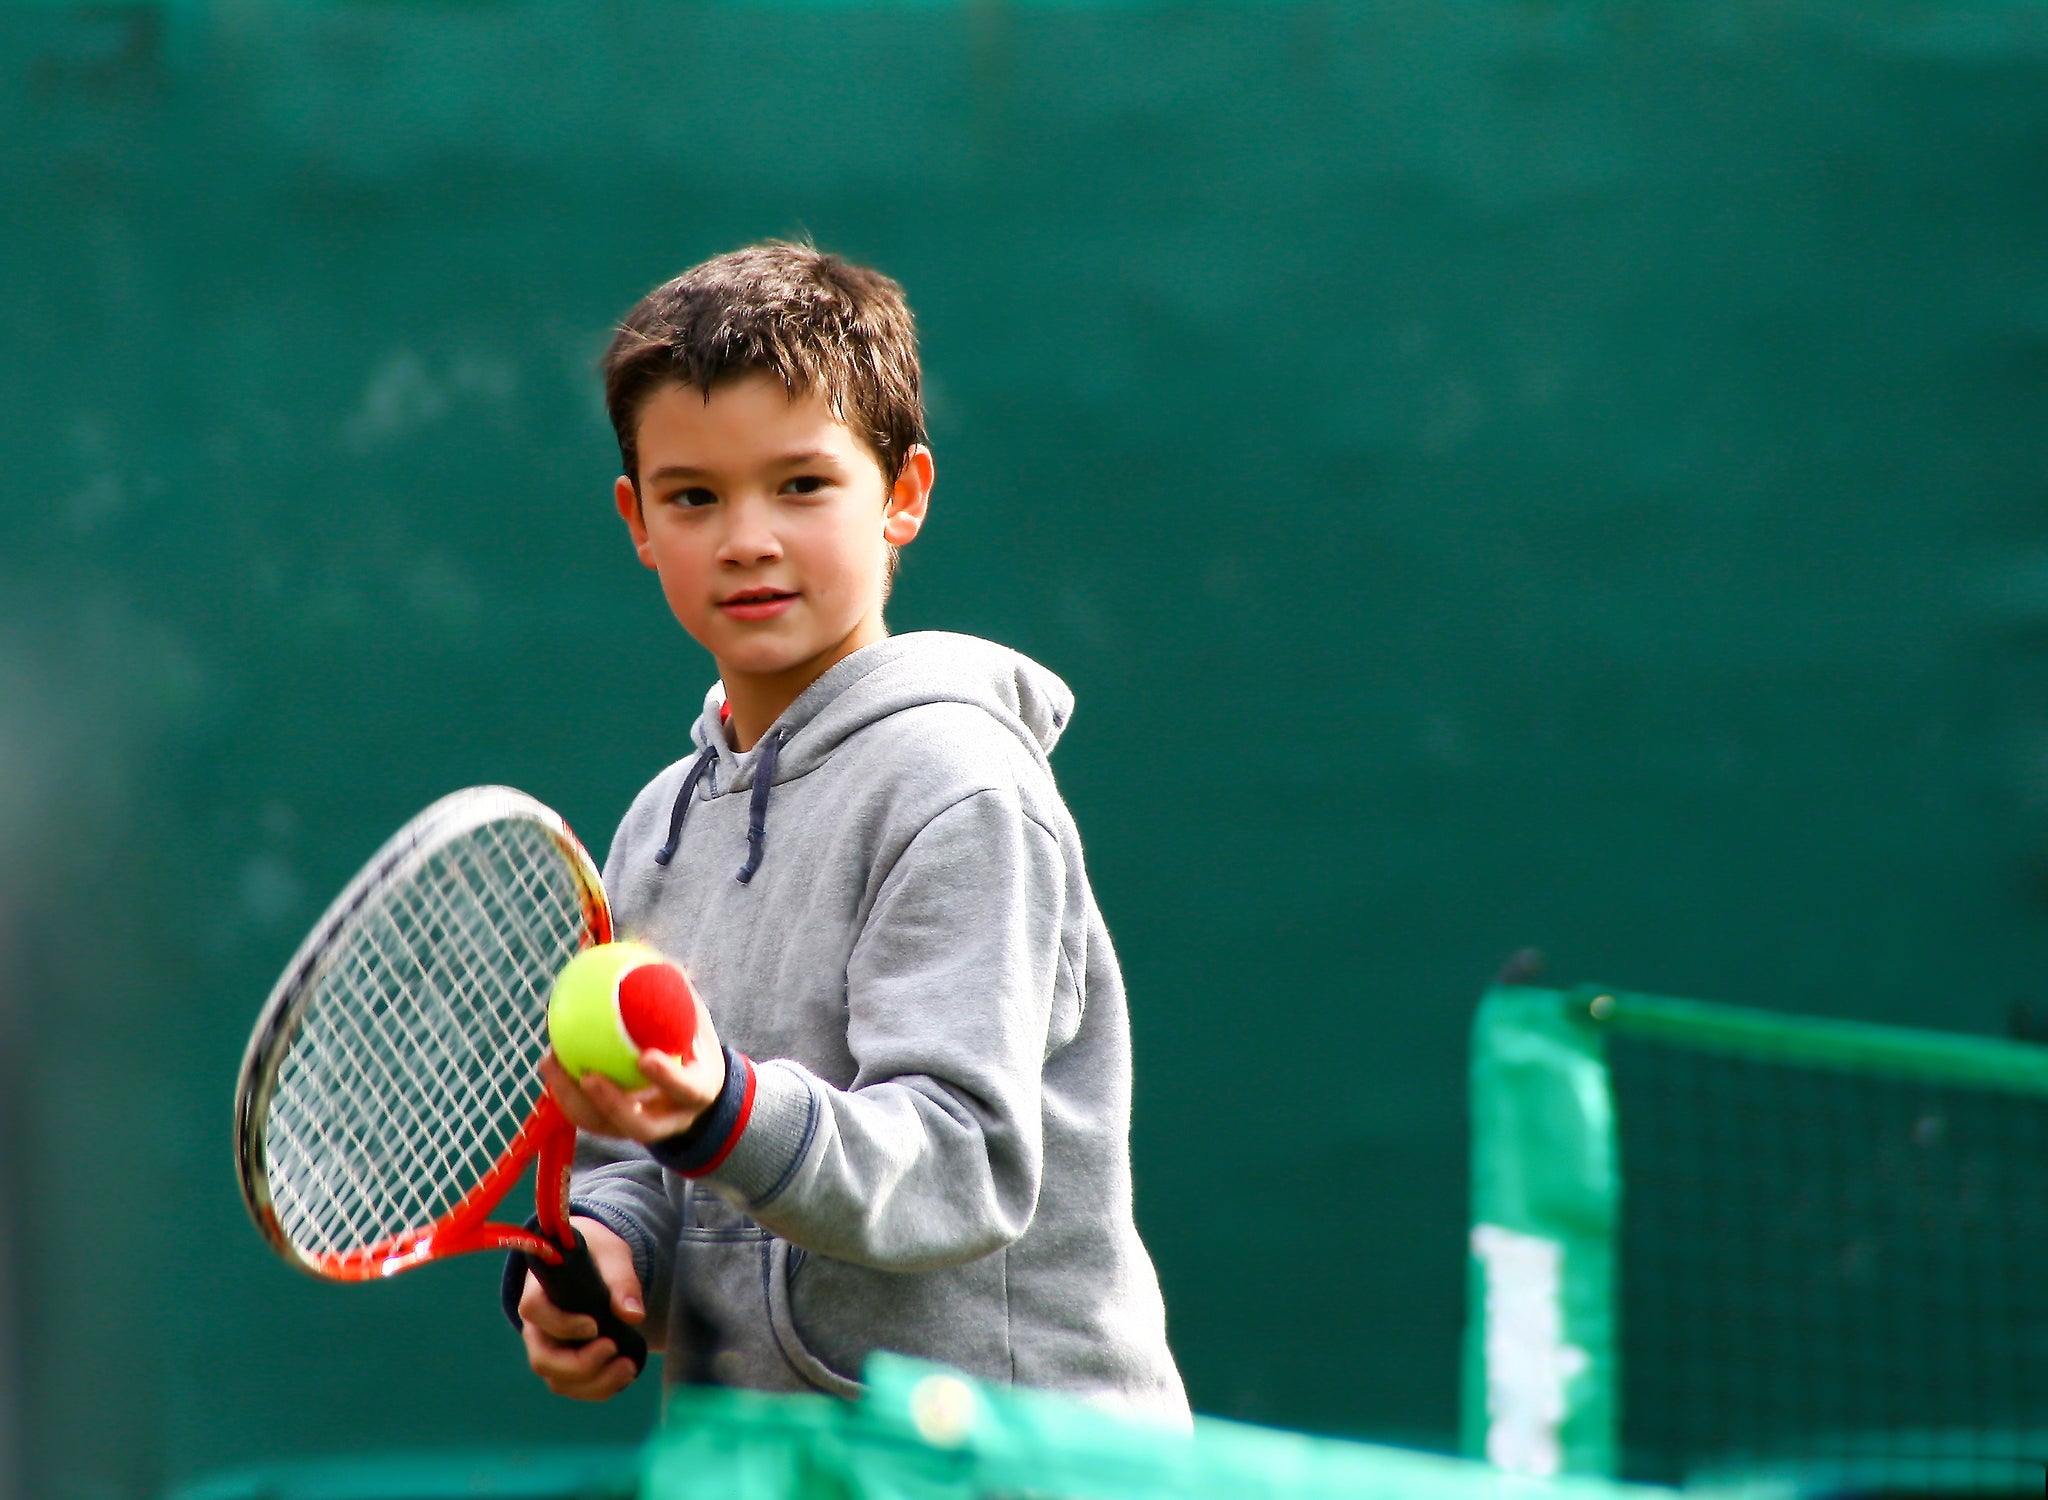 4 Tips To Get Your Child Excited About Tennis